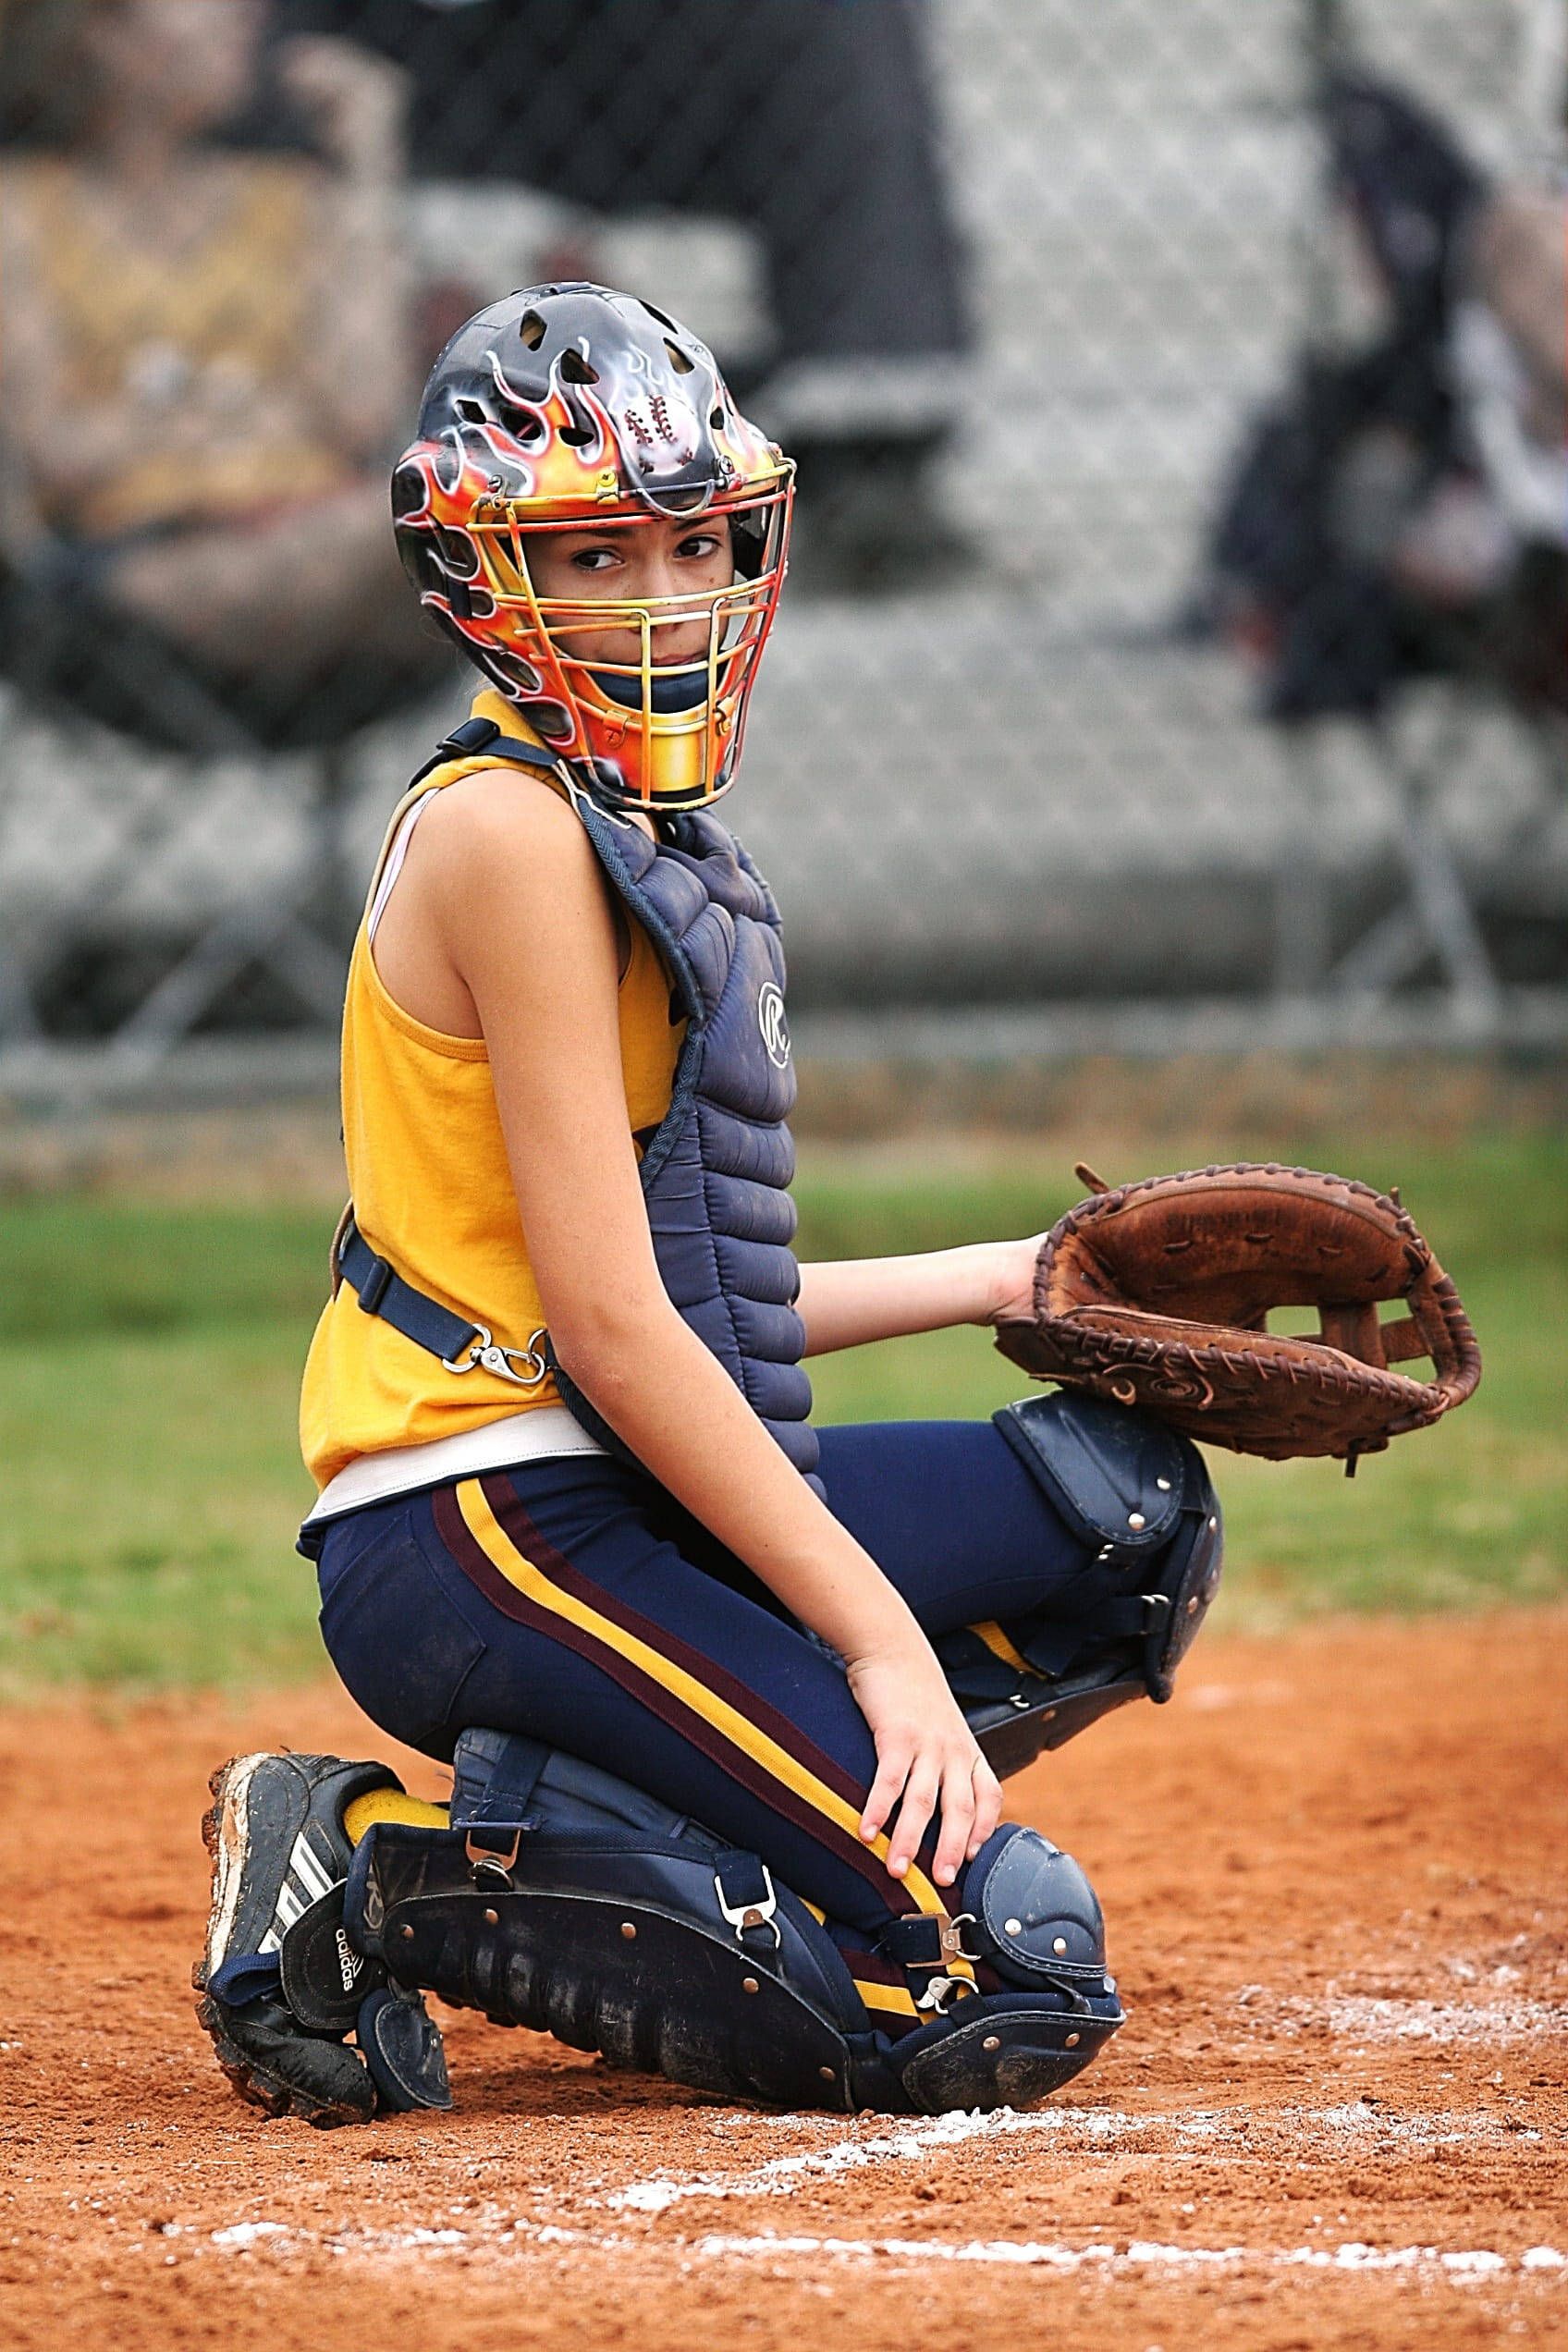 Download Softball Catcher With Flame Designed Helmet Wallpaper